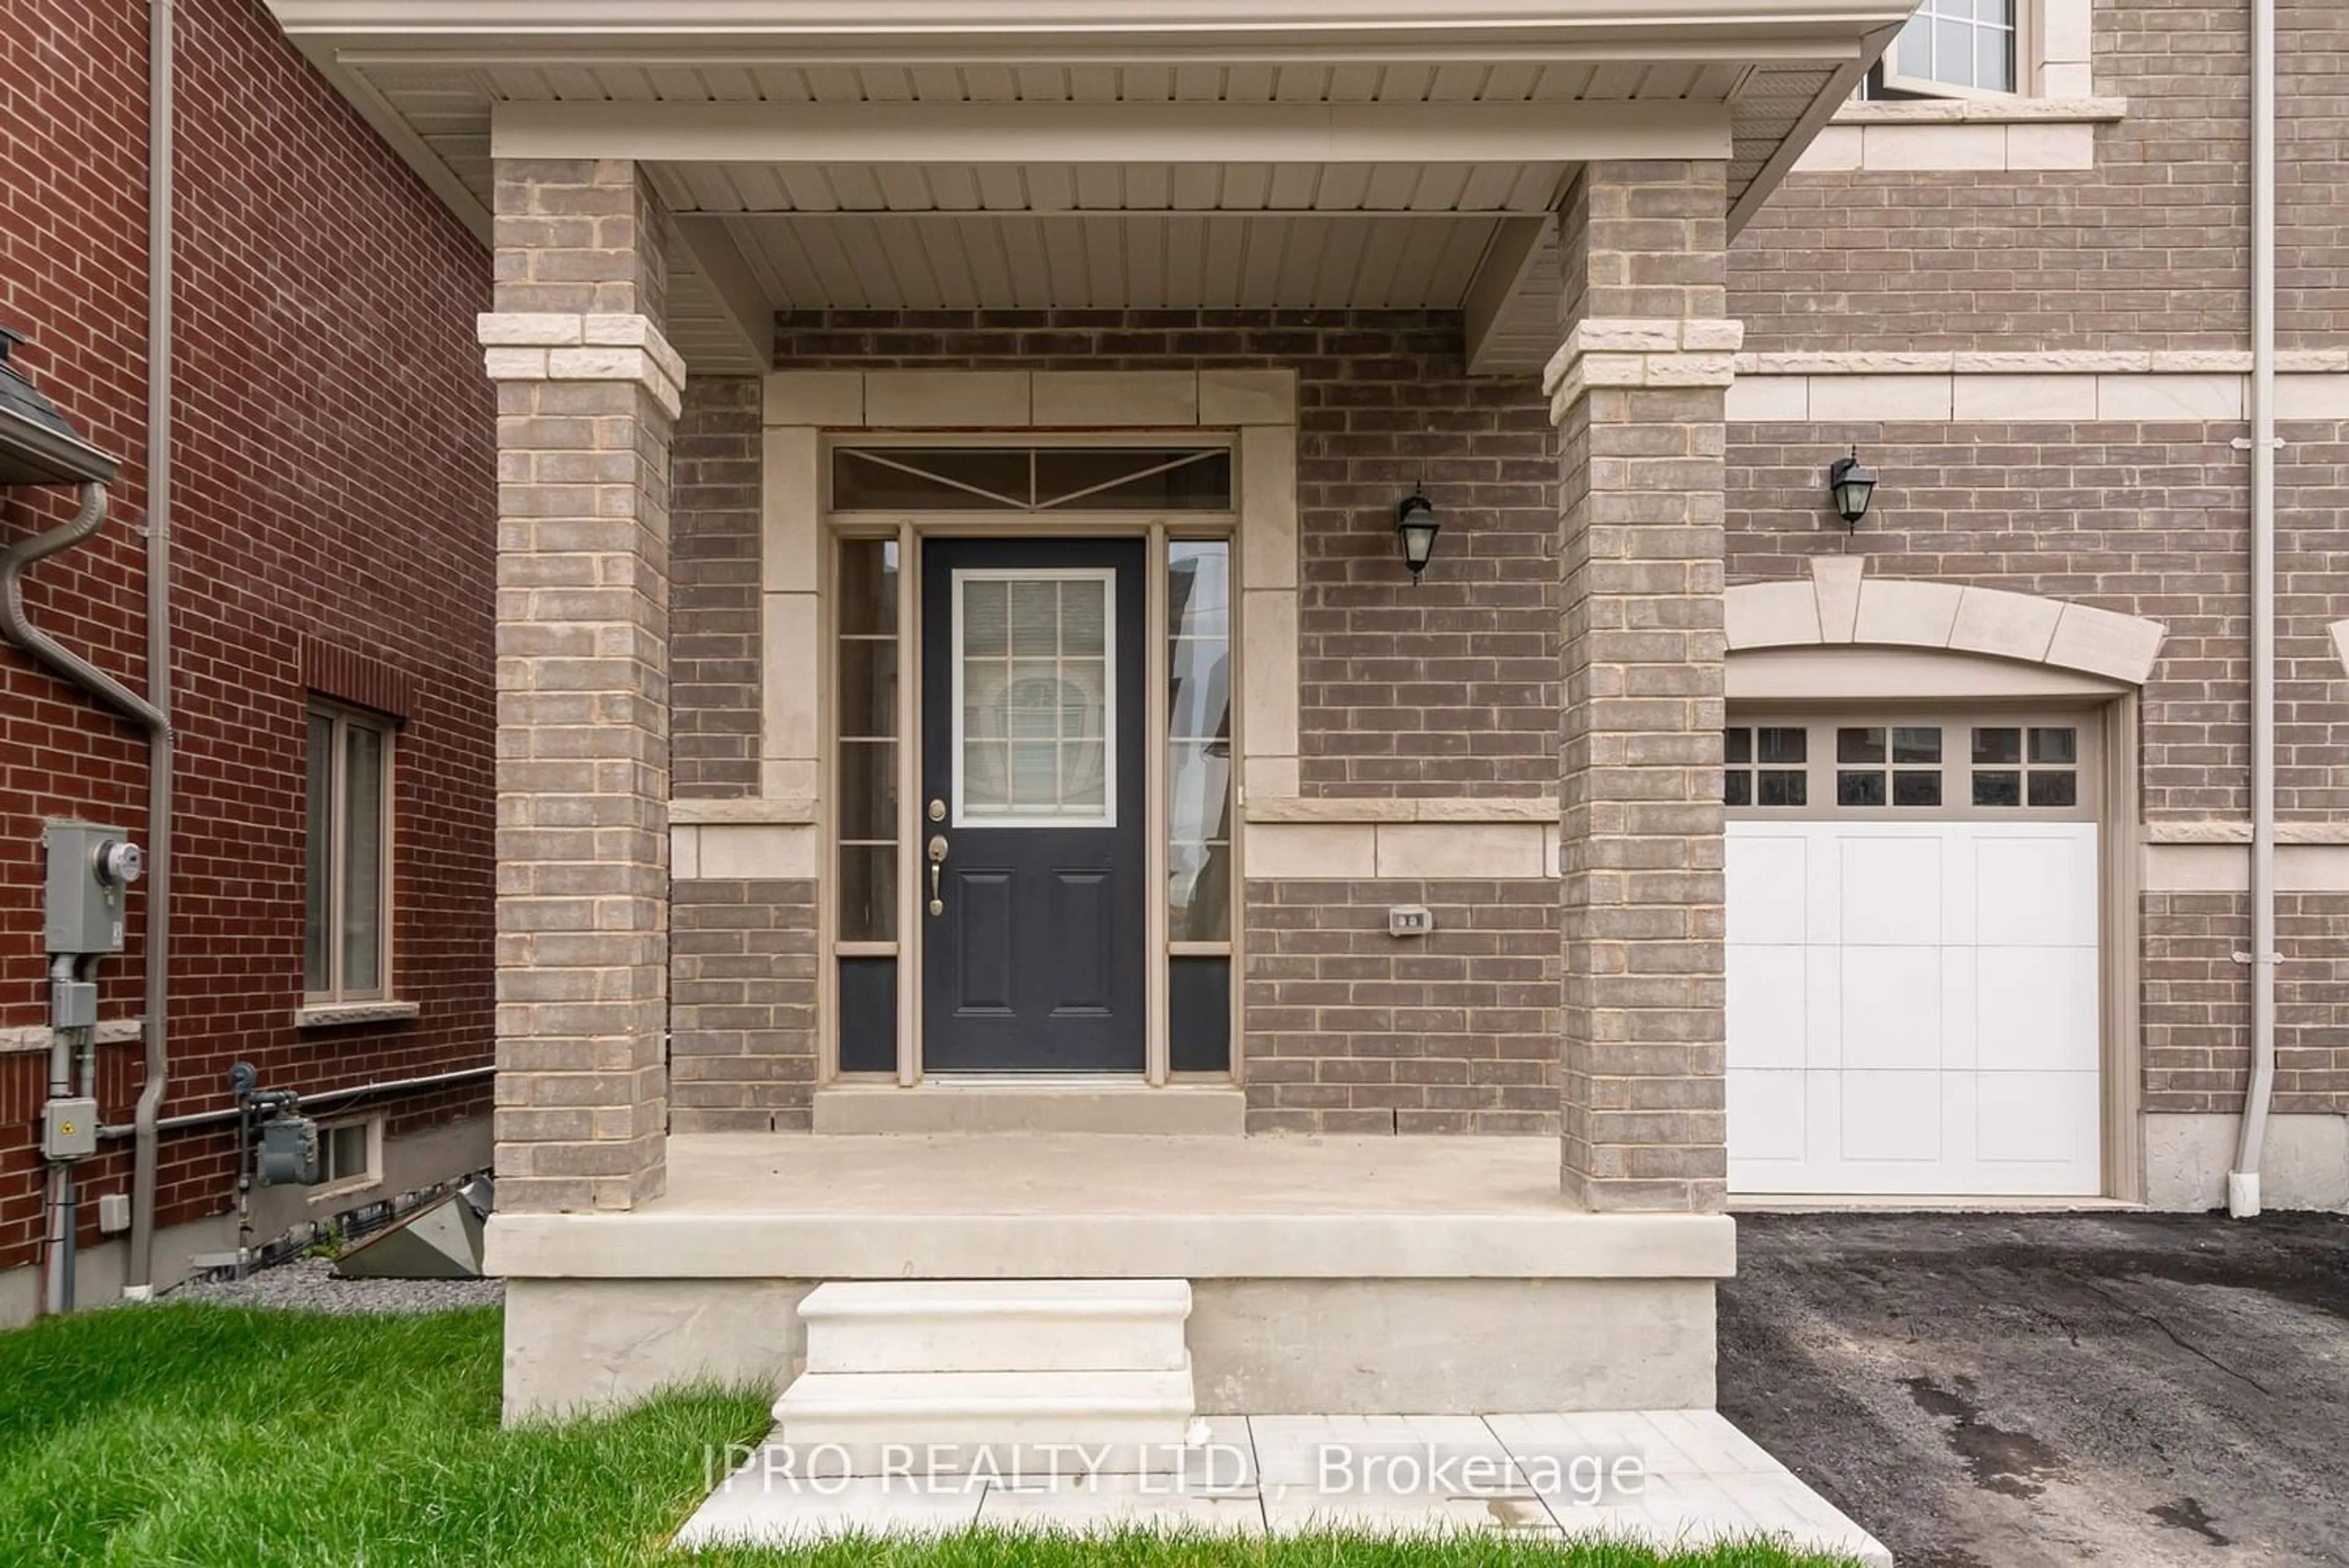 Home with brick exterior material for 1113 Skyridge Blvd, Pickering Ontario L1X 2R2